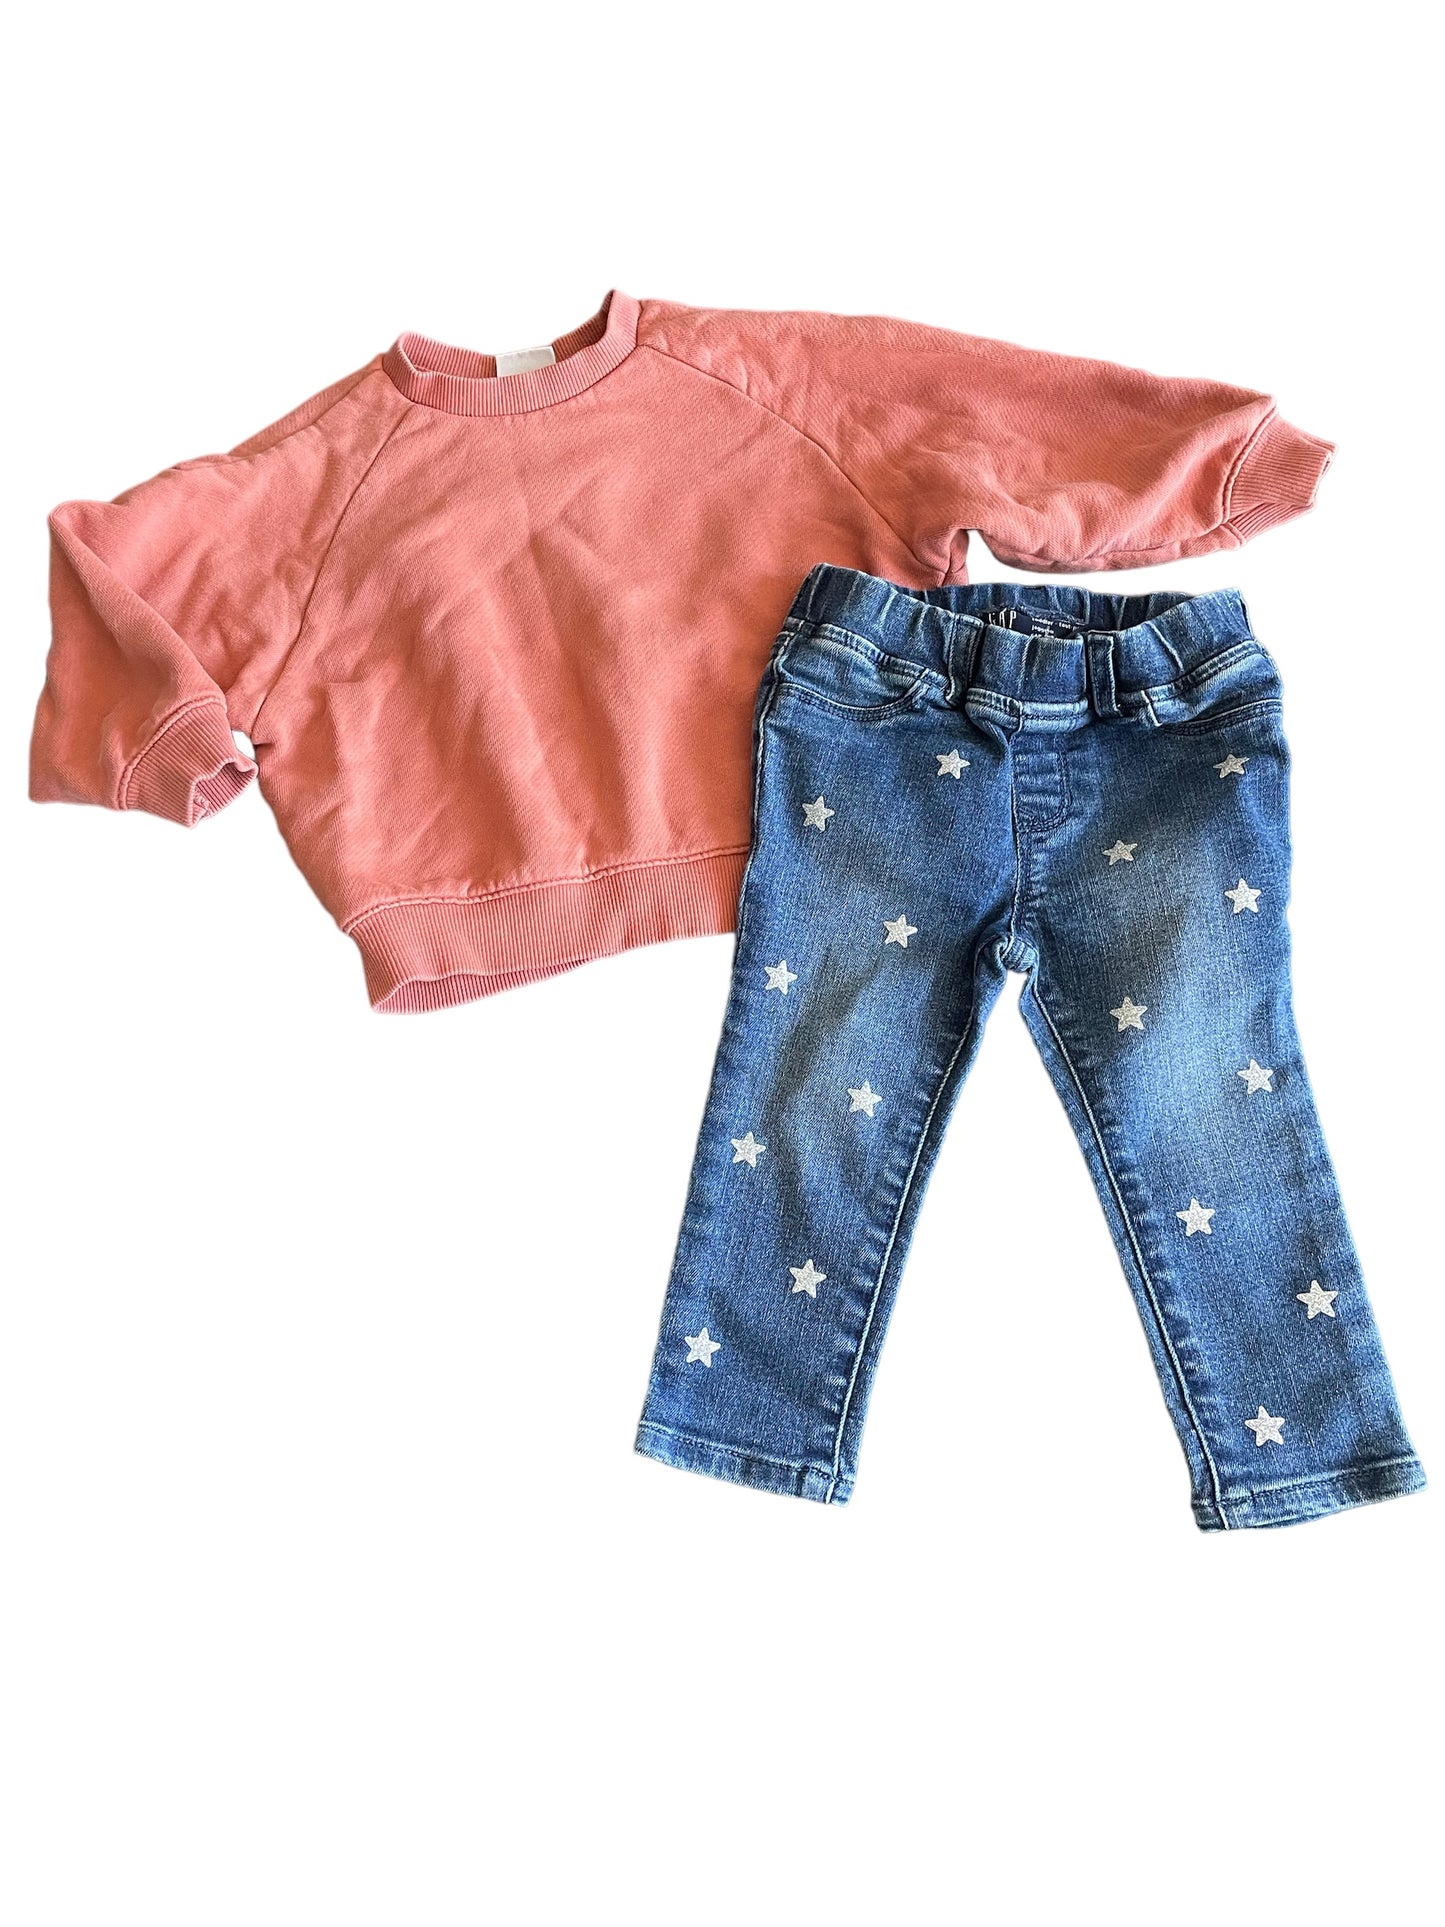 Daily basics. Size 18-24 months